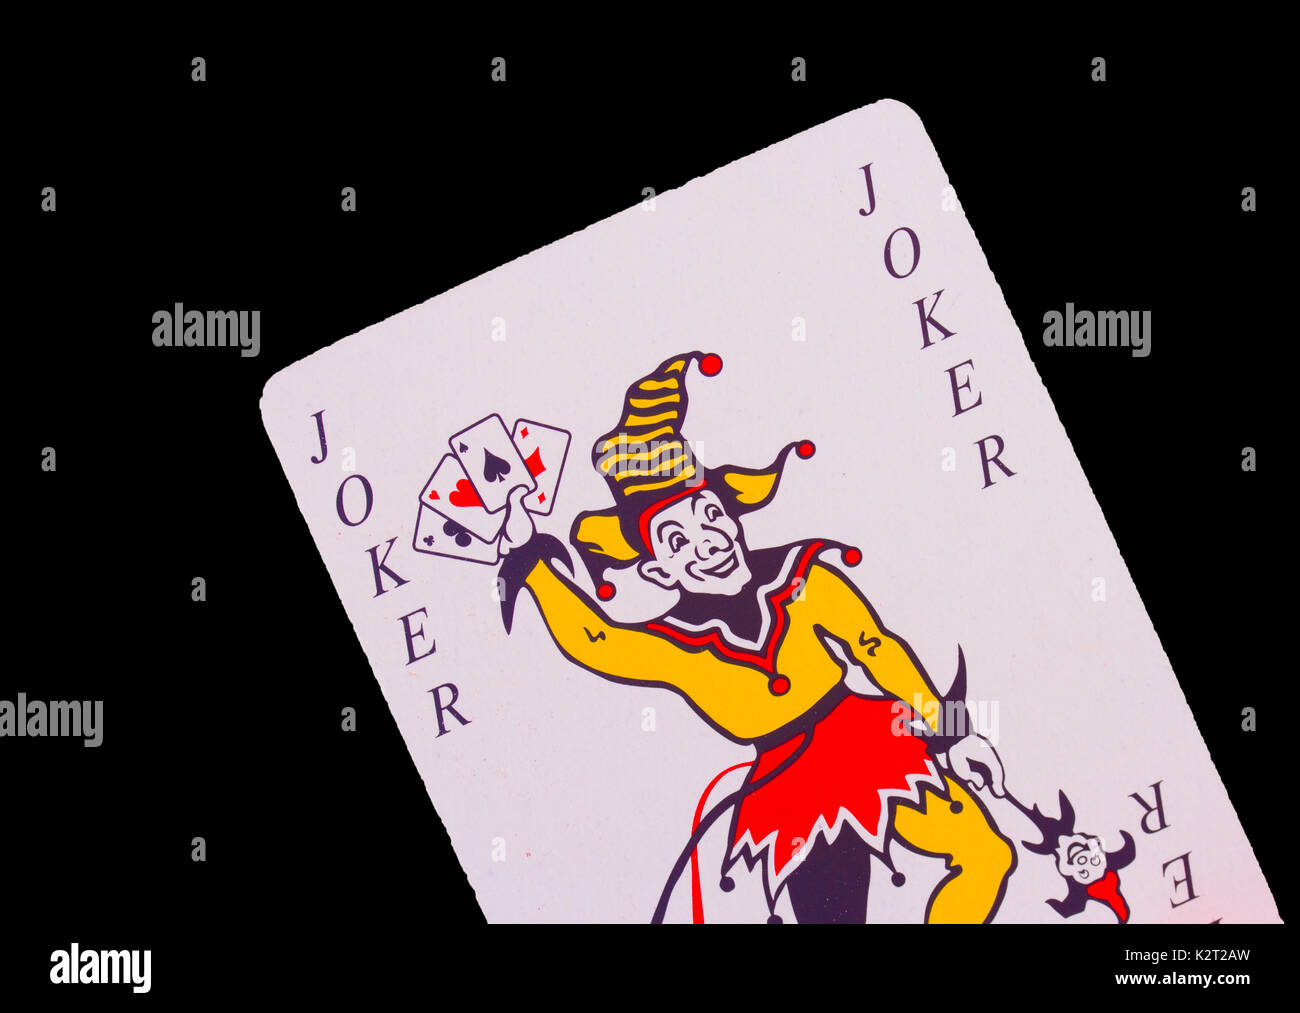 A Joker playing card set against a black background Stock Photo